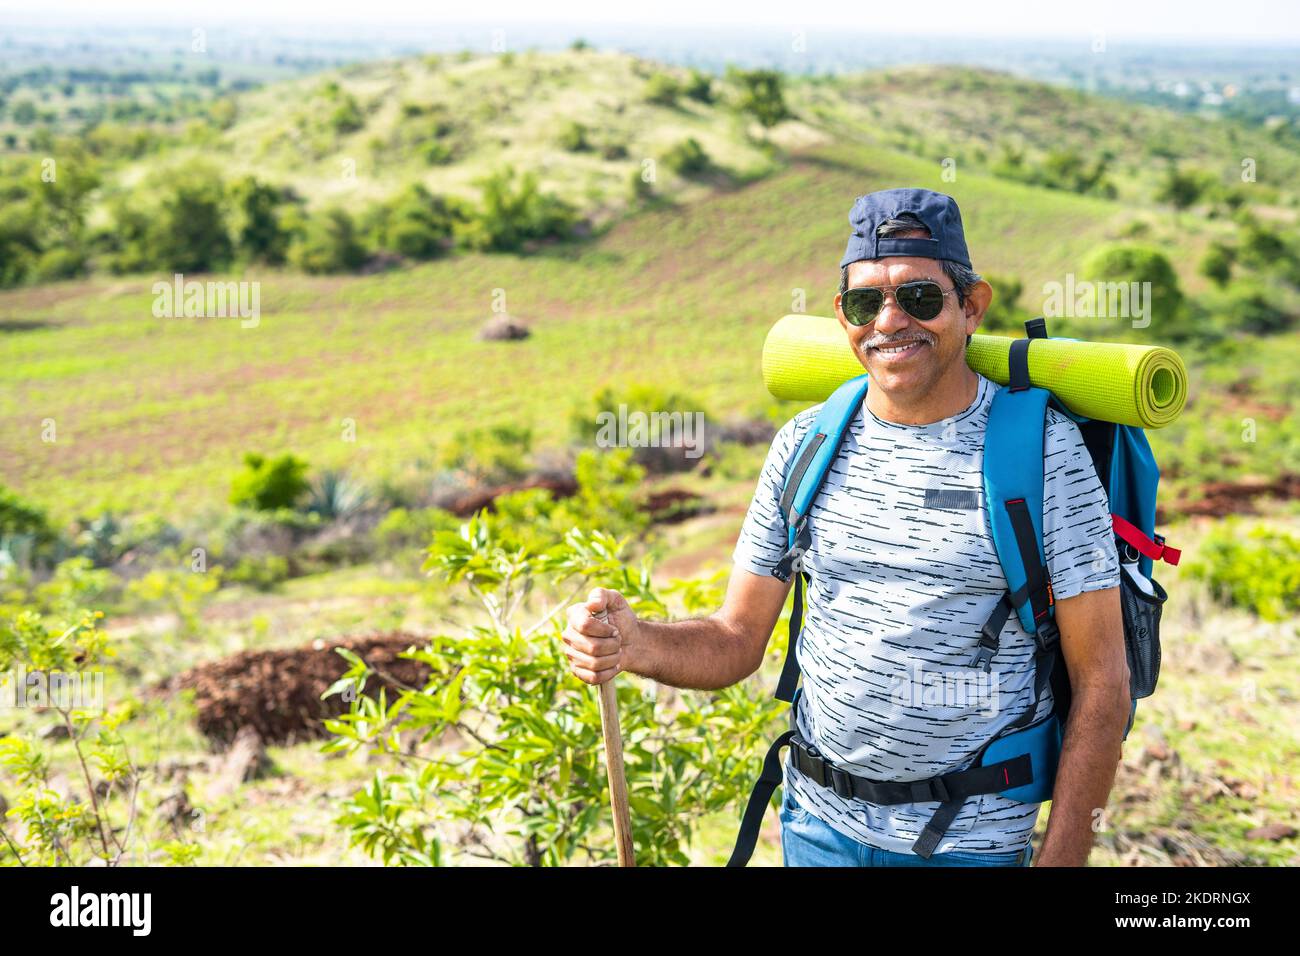 Portrait shot of Smiling middle aged hiker with backpack climbing mountain by looking at camera - concept of confidence, trekking and freedom Stock Photo